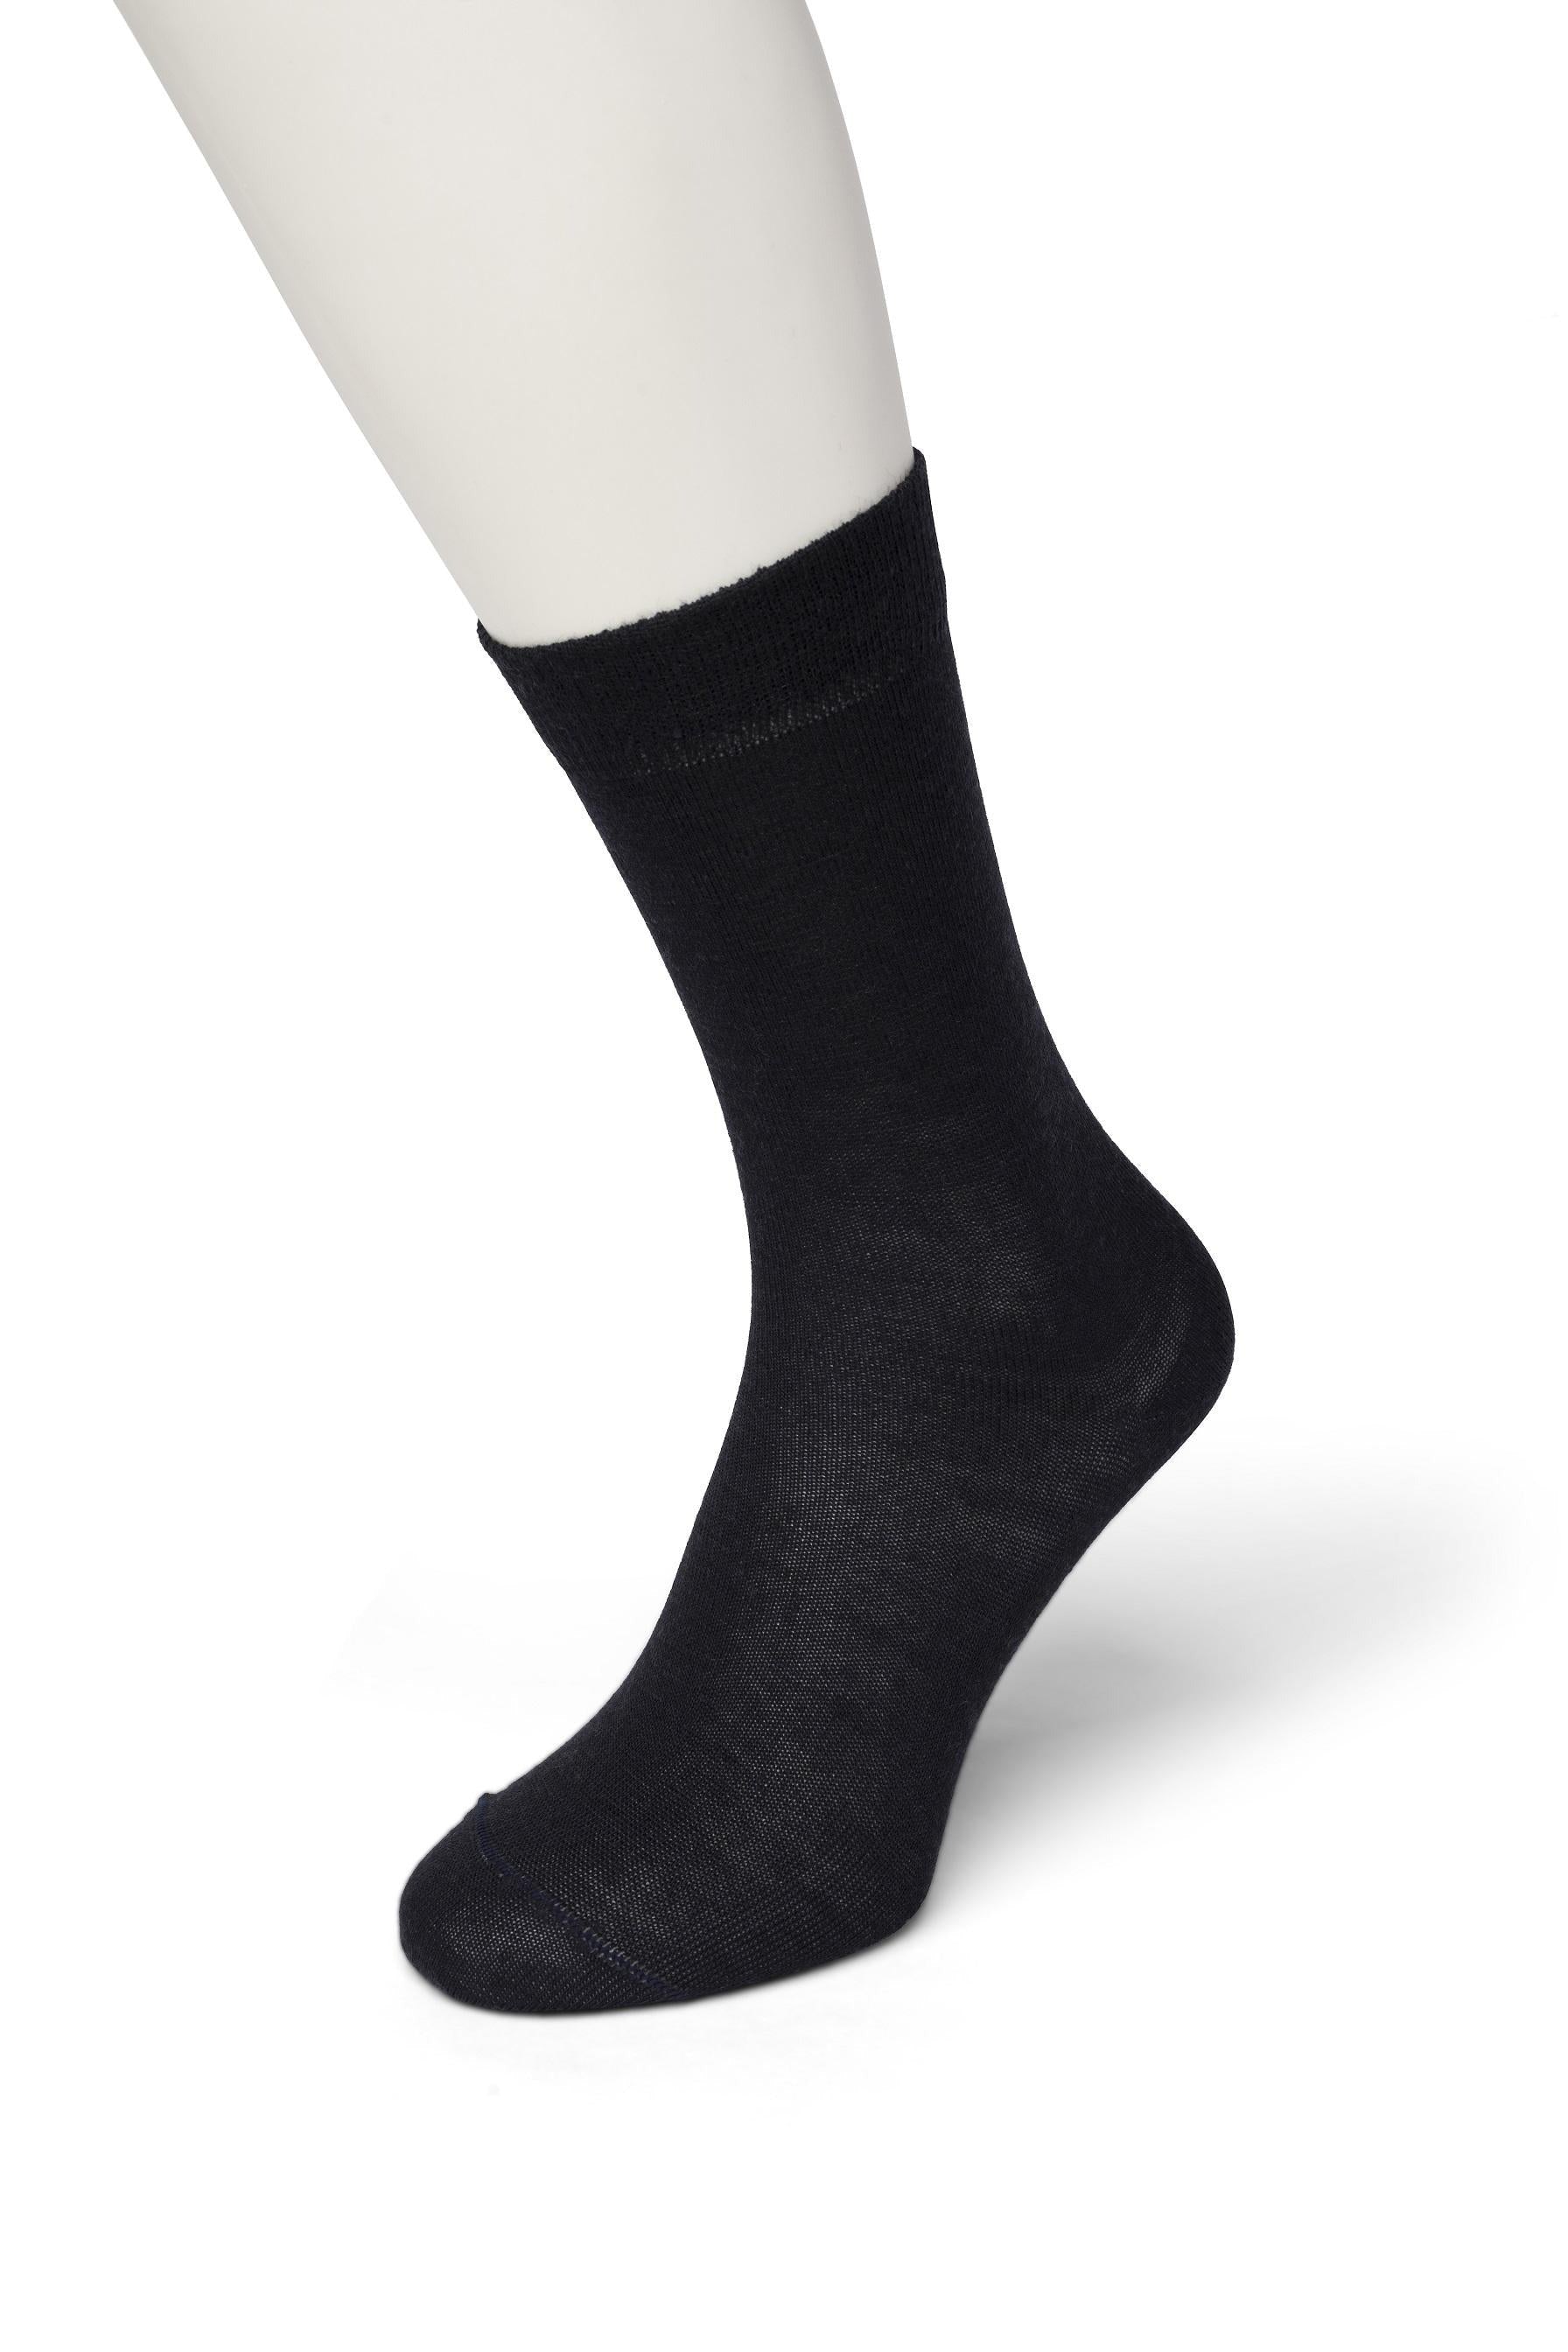 Bonnie Doon Wool/Cotton Sock BD631402 - Dark navy blue warm thermal ankle socks perfect for the cold Winter weather